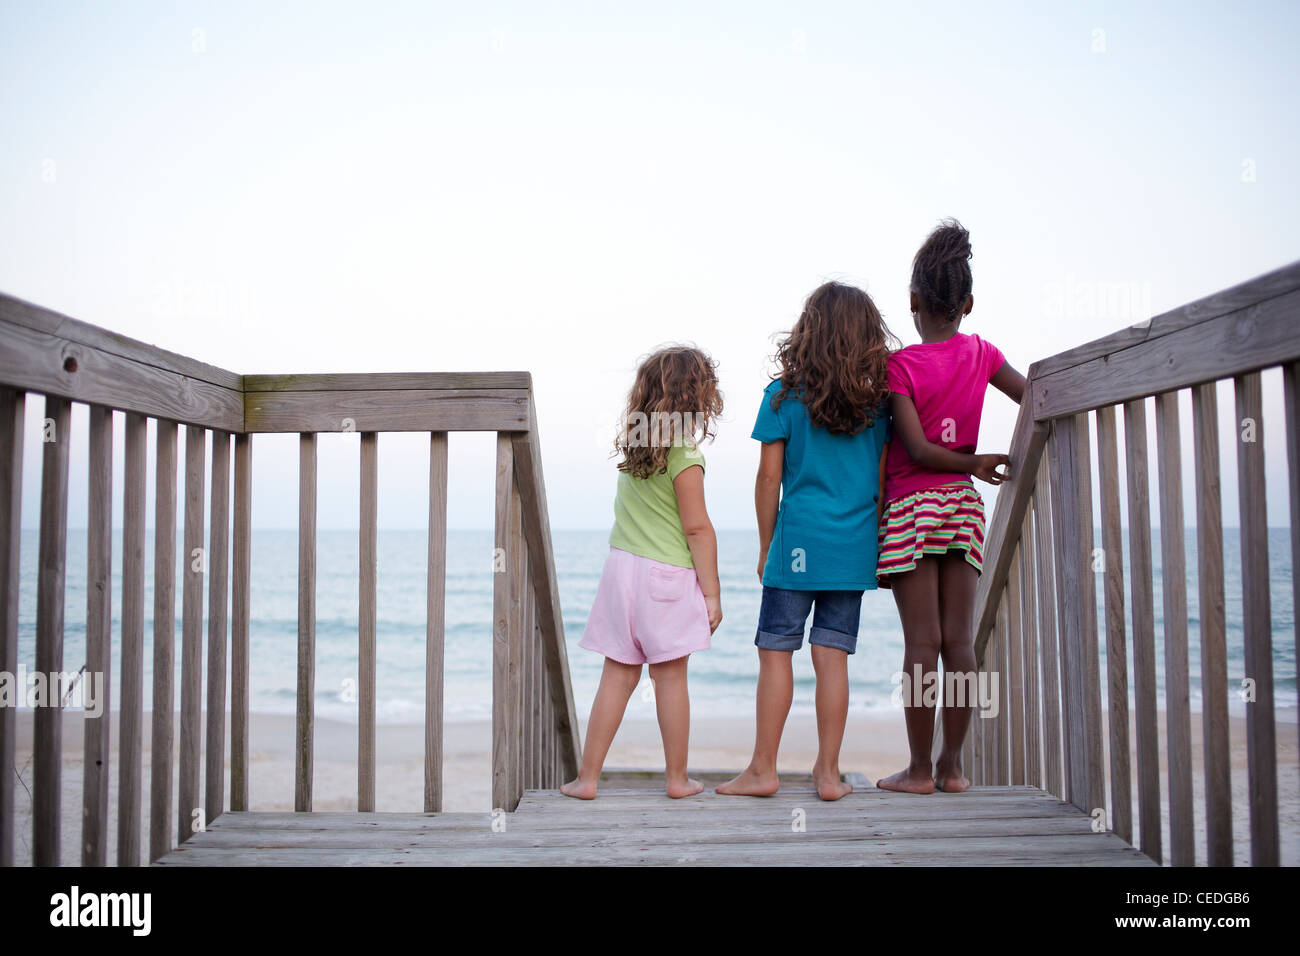 Girls standing together on deck near ocean Stock Photo